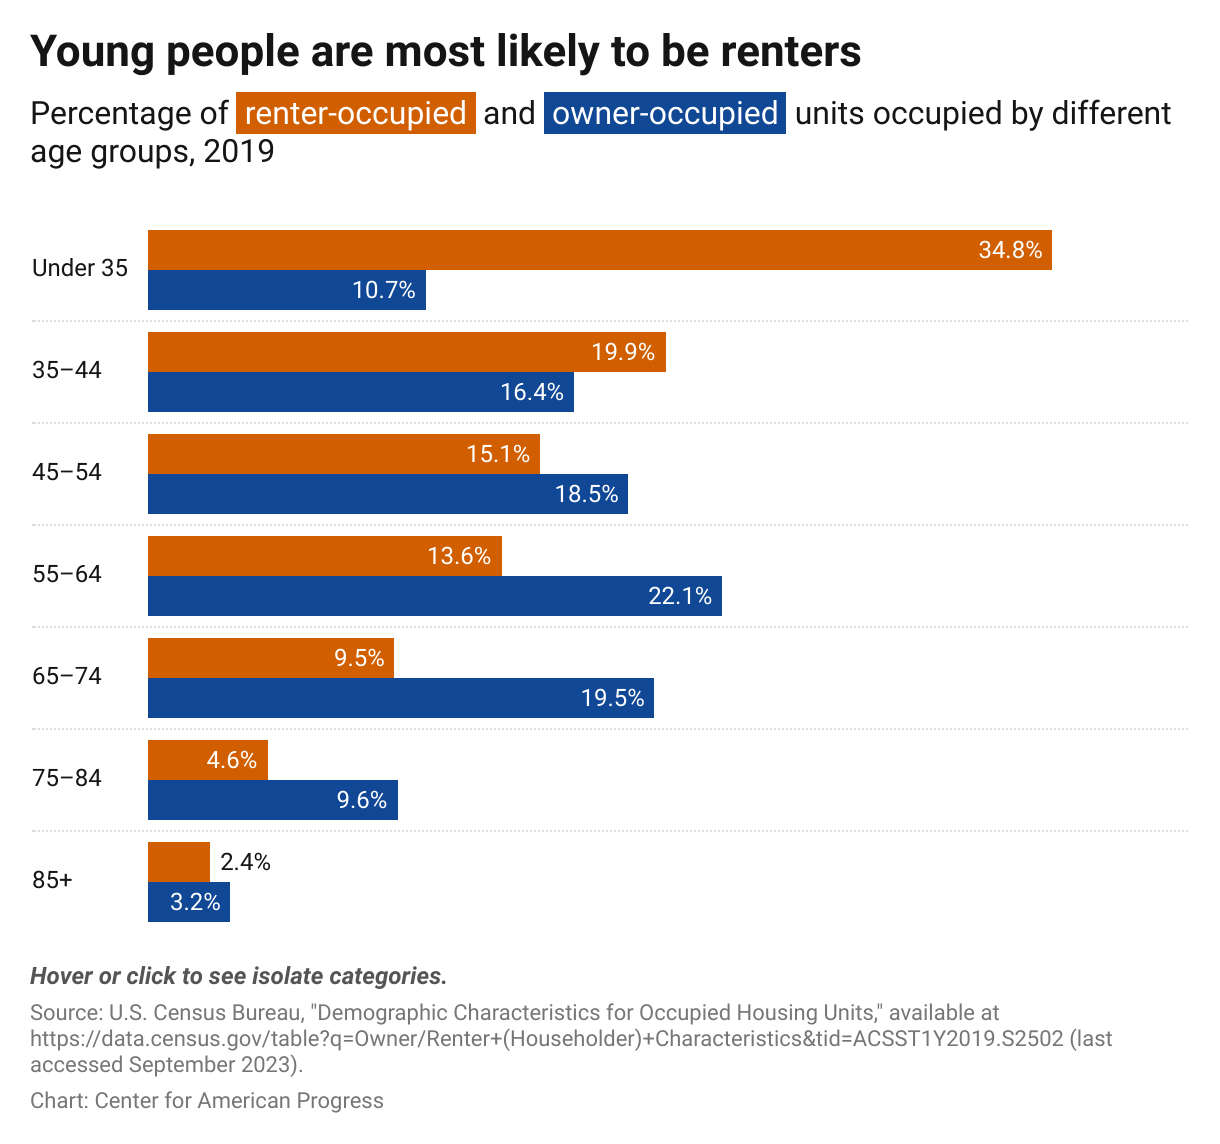 Bar graph showing that the majority of renters are under age 35, at 34.8 percent, compared with 35- to 44-year-olds, who only make up 19.9 percent of renter-occupied units and those older than 65, who make up less than 10 percent of renter-occupied units.